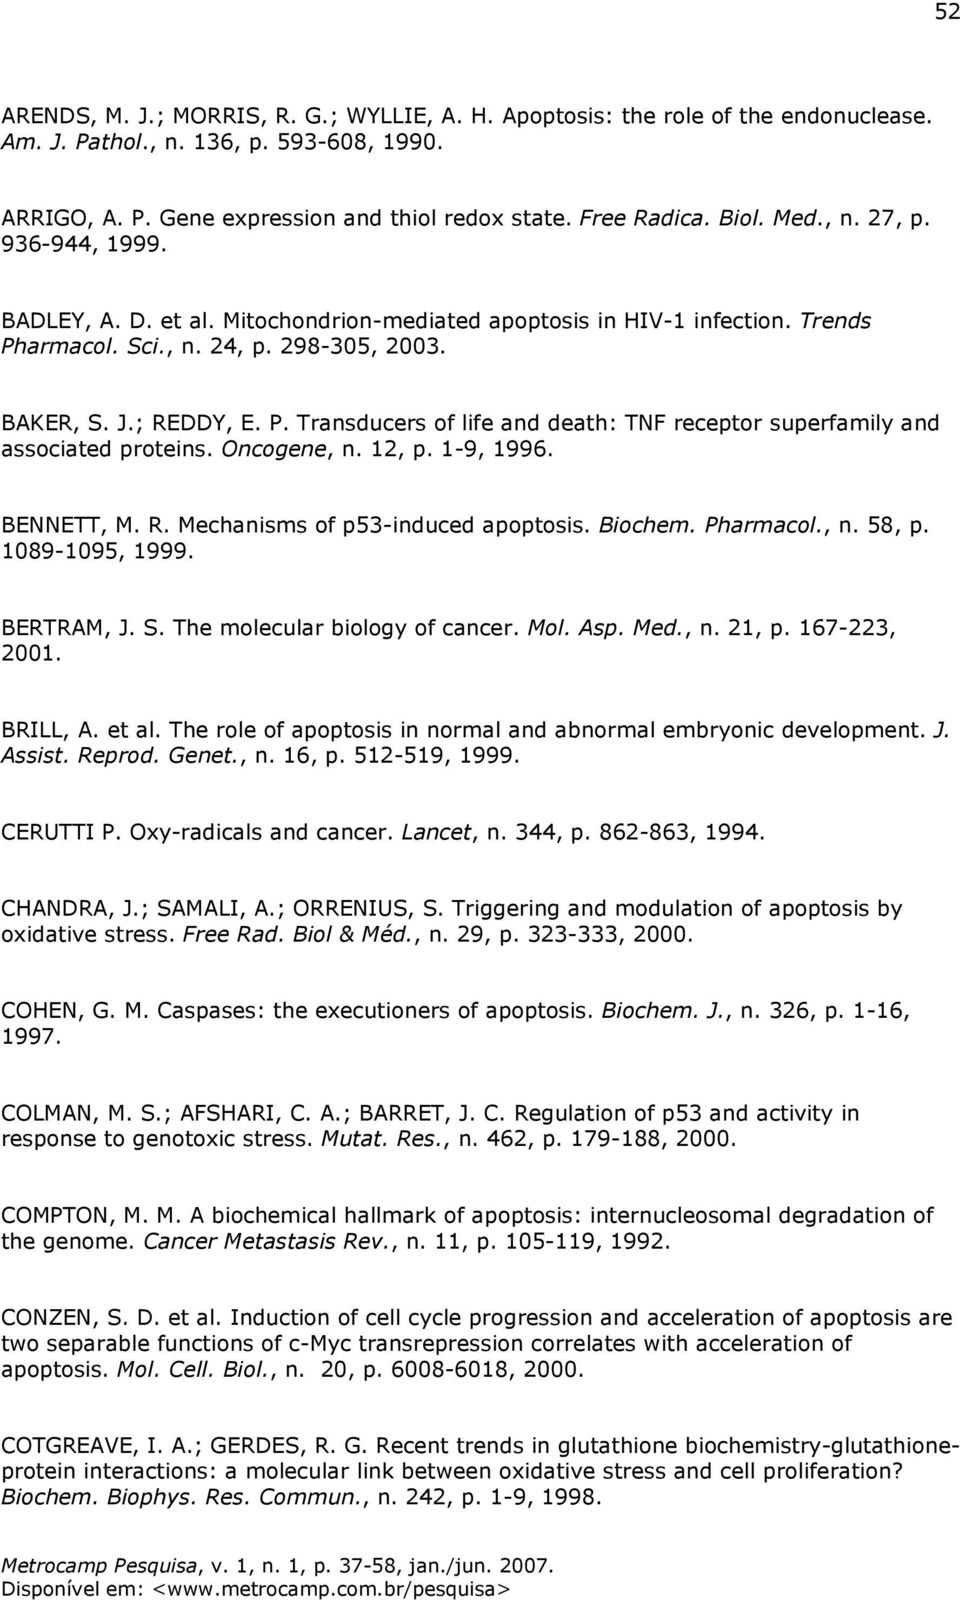 armacol. Sci., n. 24, p. 298-305, 2003. BAKER, S. J.; REDDY, E. P. Transducers of life and death: TNF receptor superfamily and associated proteins. Oncogene, n. 12, p. 1-9, 1996. BENNETT, M. R. Mechanisms of p53-induced apoptosis.